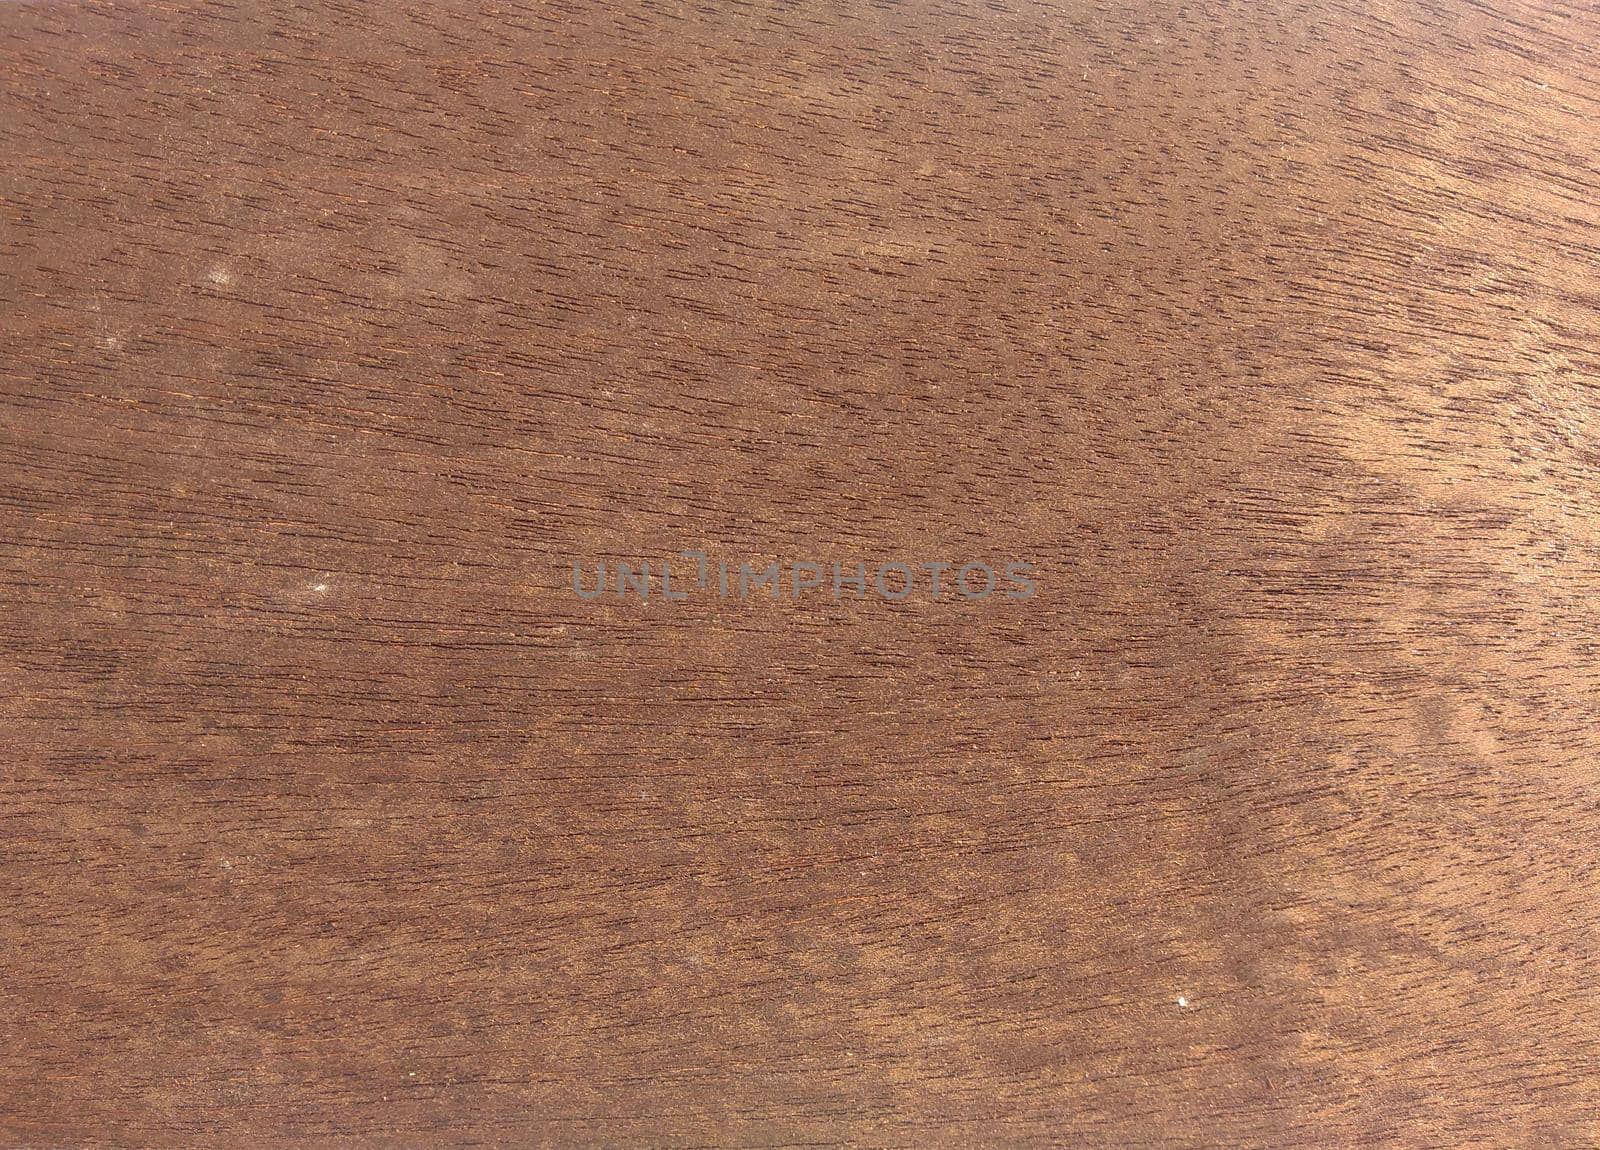 Natural Smoked sapele crown wood texture background. Smoked sapele crown veneer surface for interior and exterior manufacturers use.